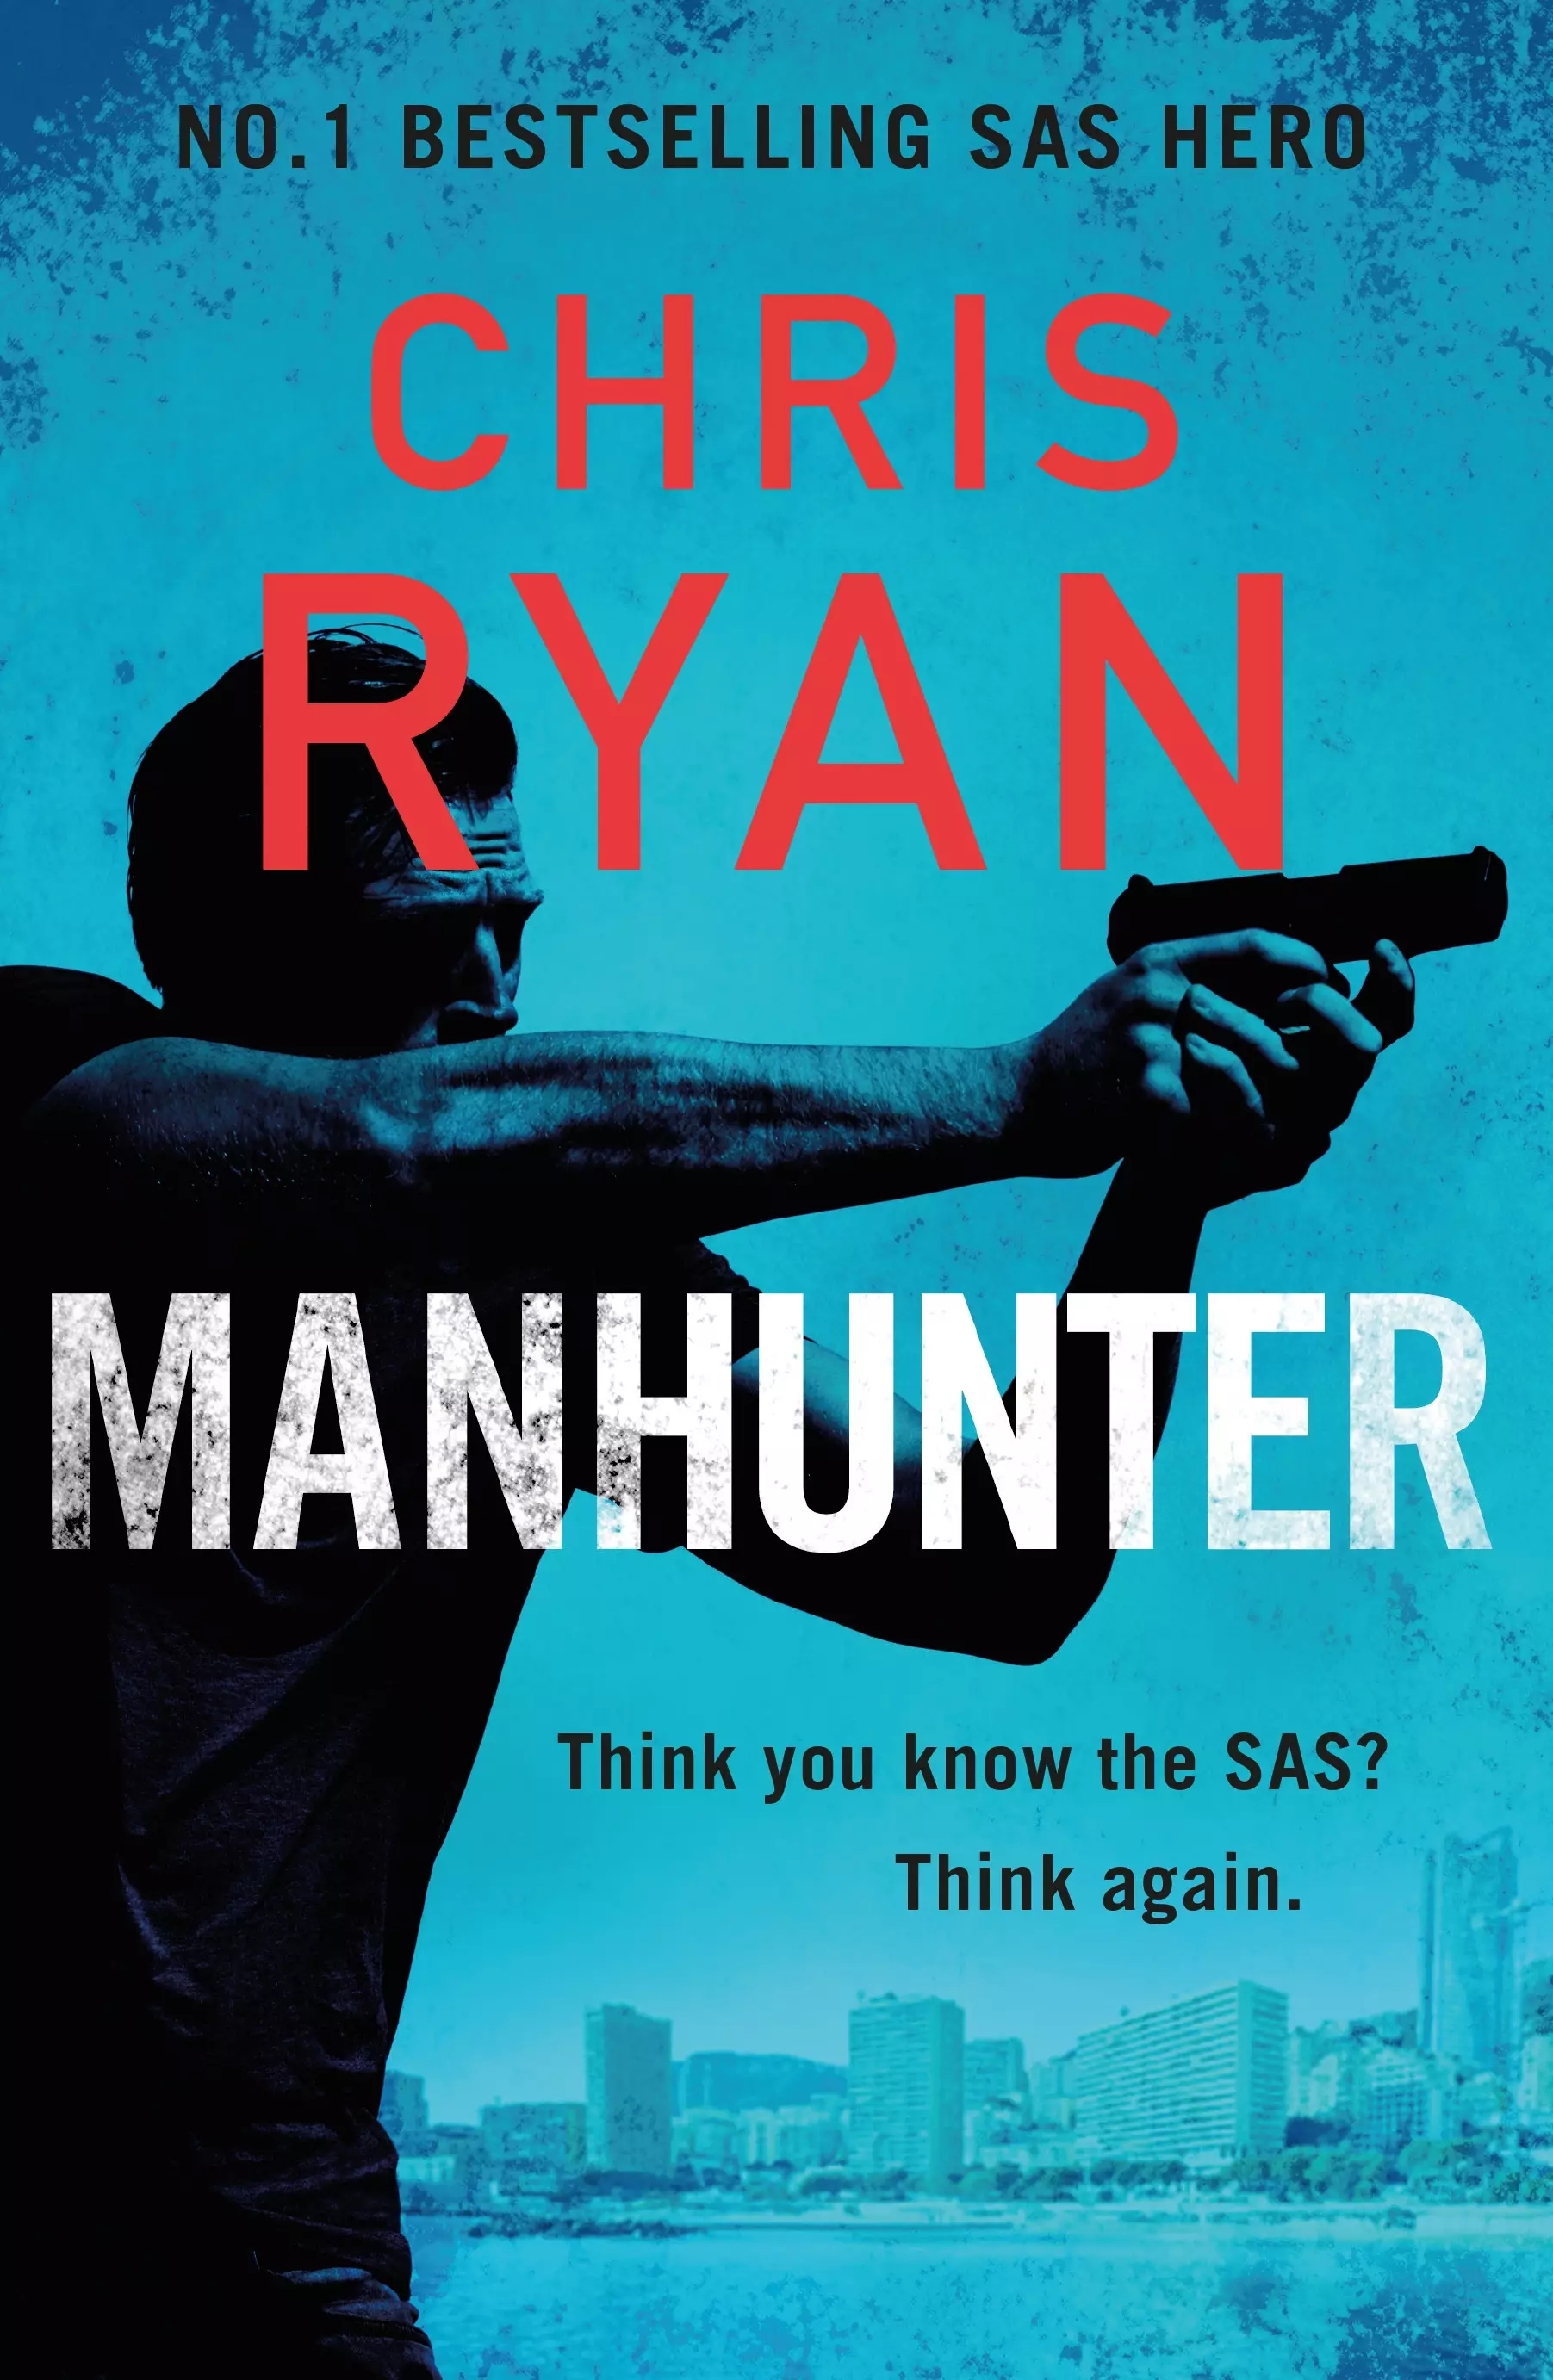 Chris Ryan's new book Manhunter is out now.